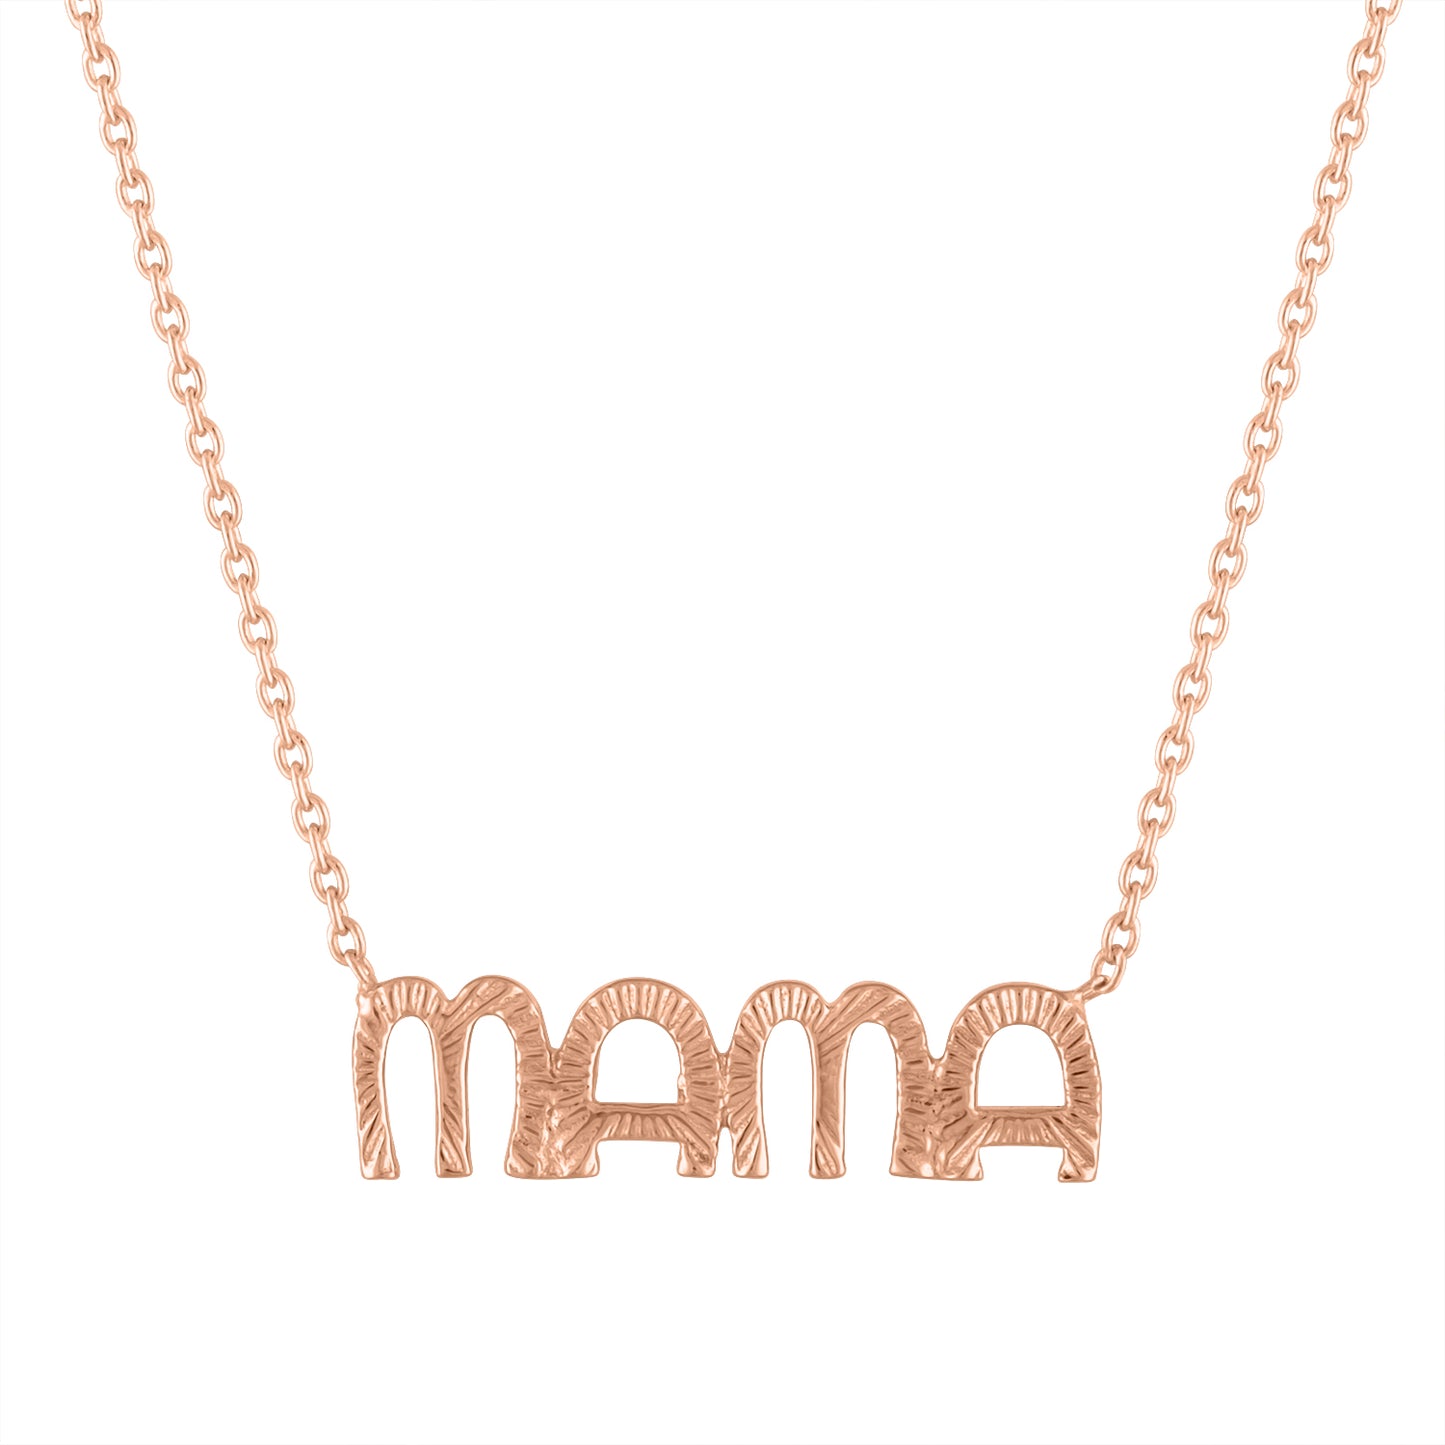 Rose gold mama necklace with fluting.